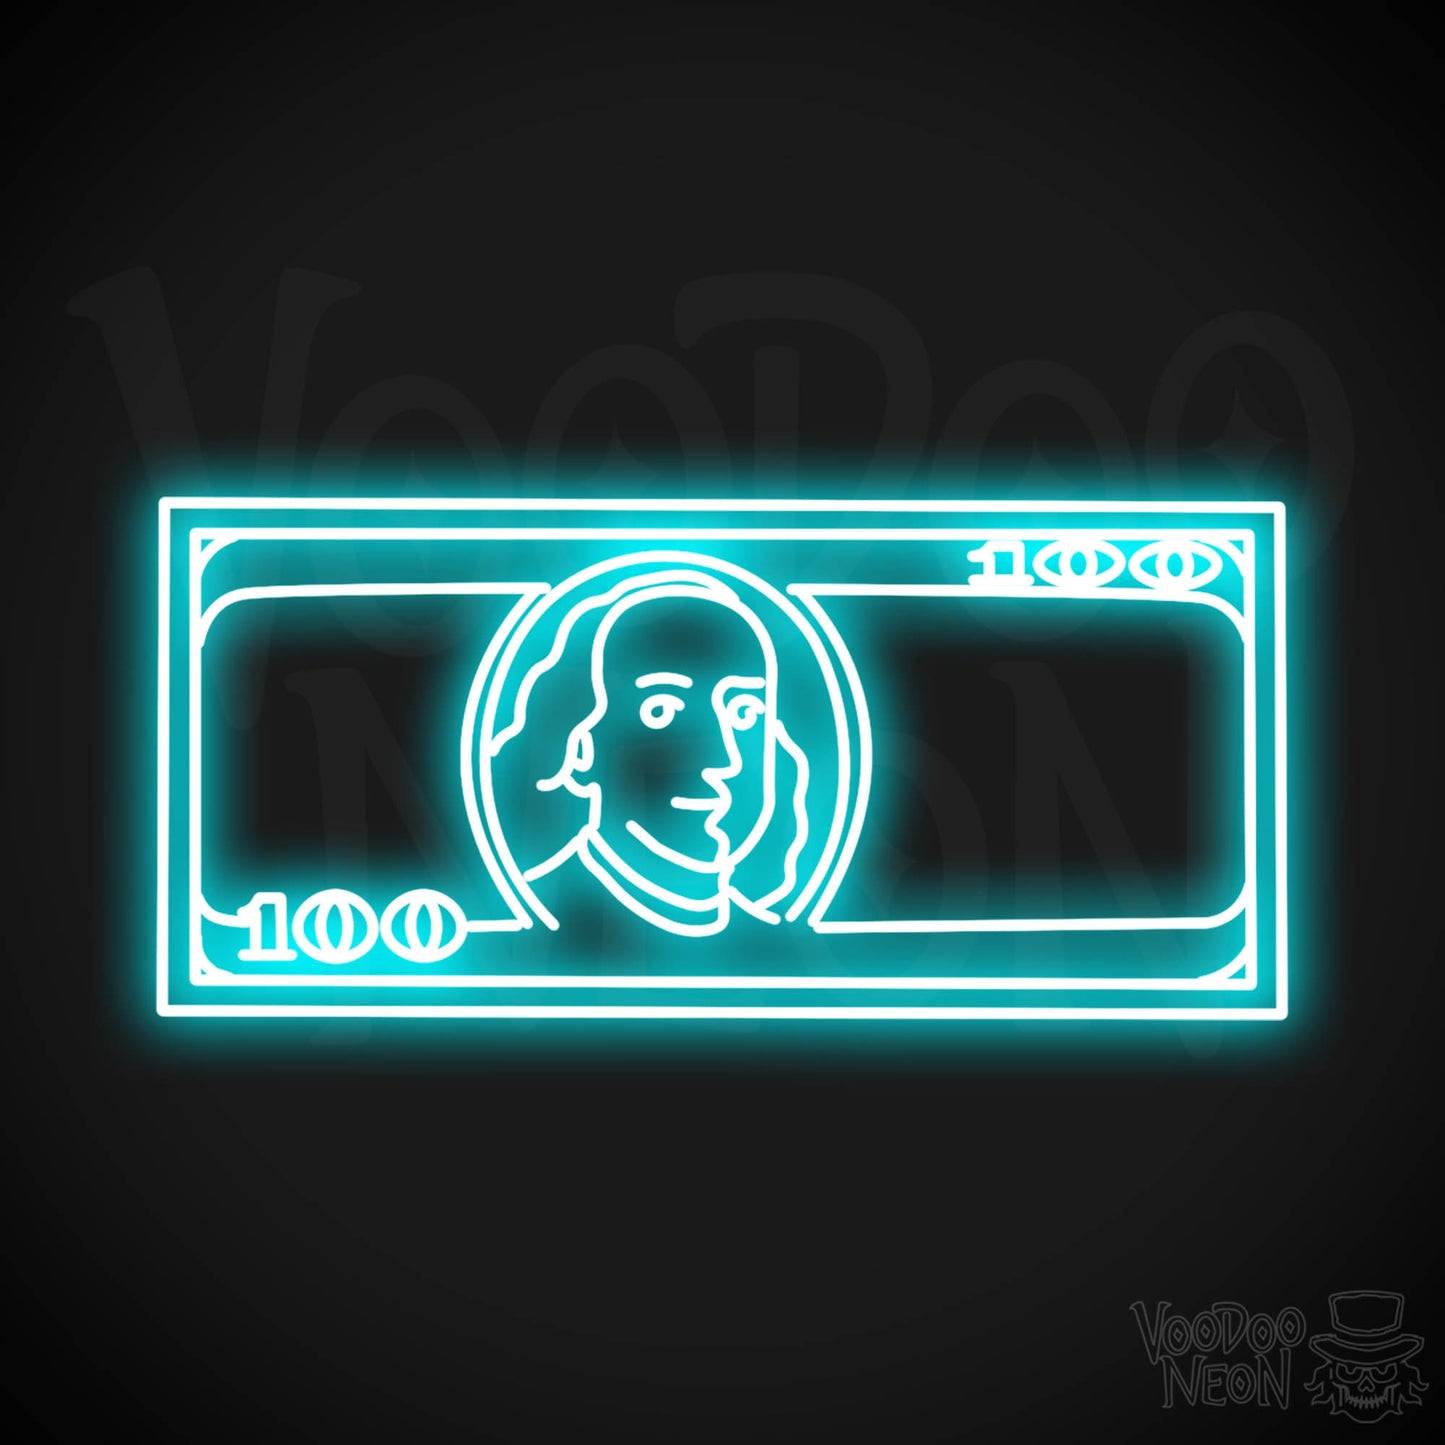 US $100 Bill Neon Sign - Neon $100 Sign - Color Ice Blue